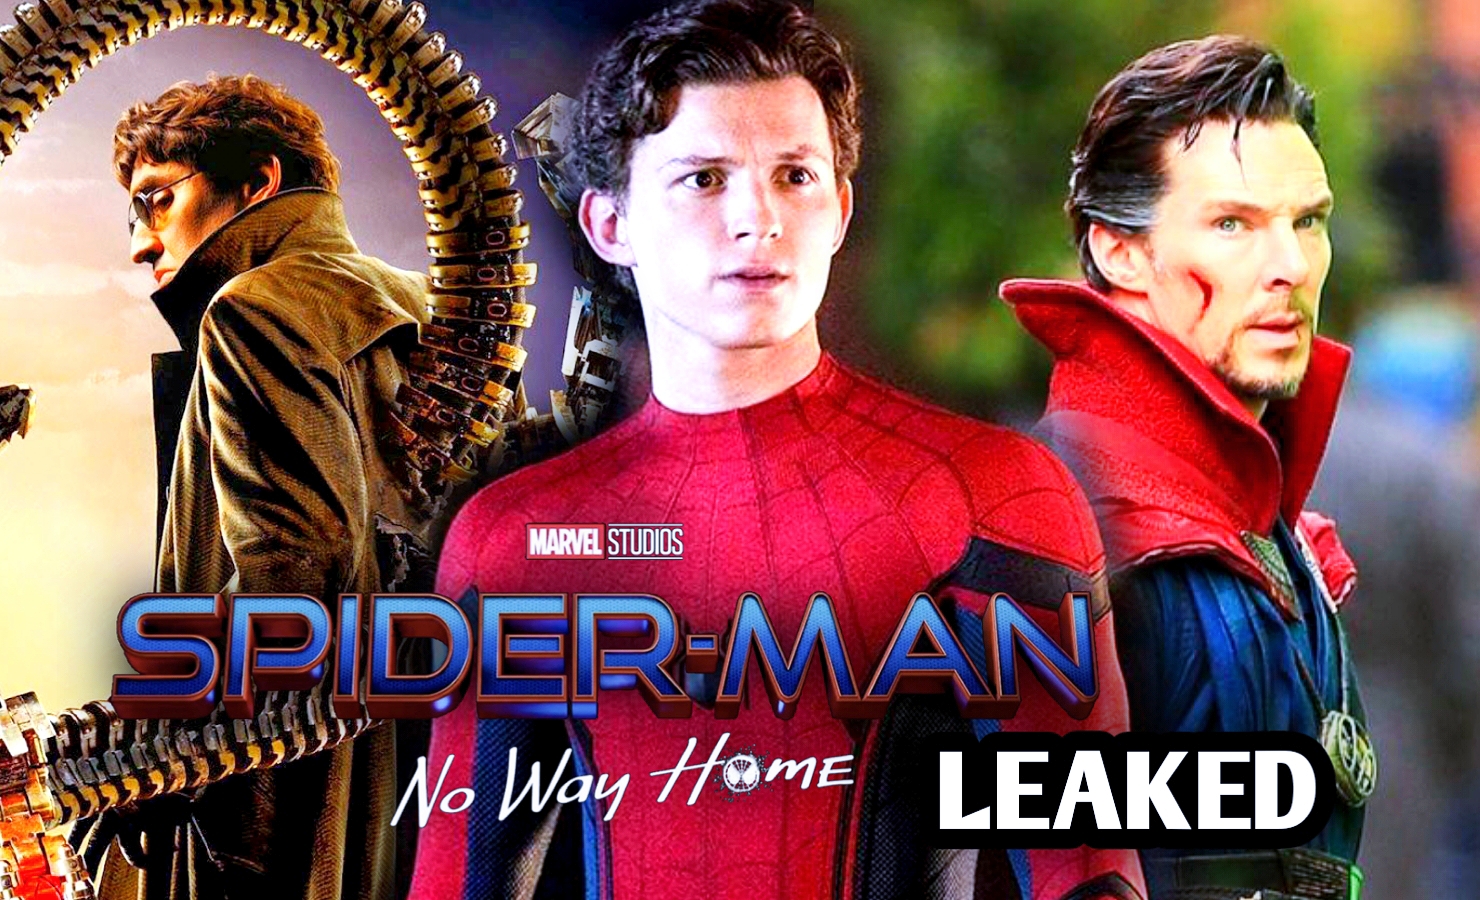 Spider-Man No Way Home Trailer Leaked Online, Sony In Action